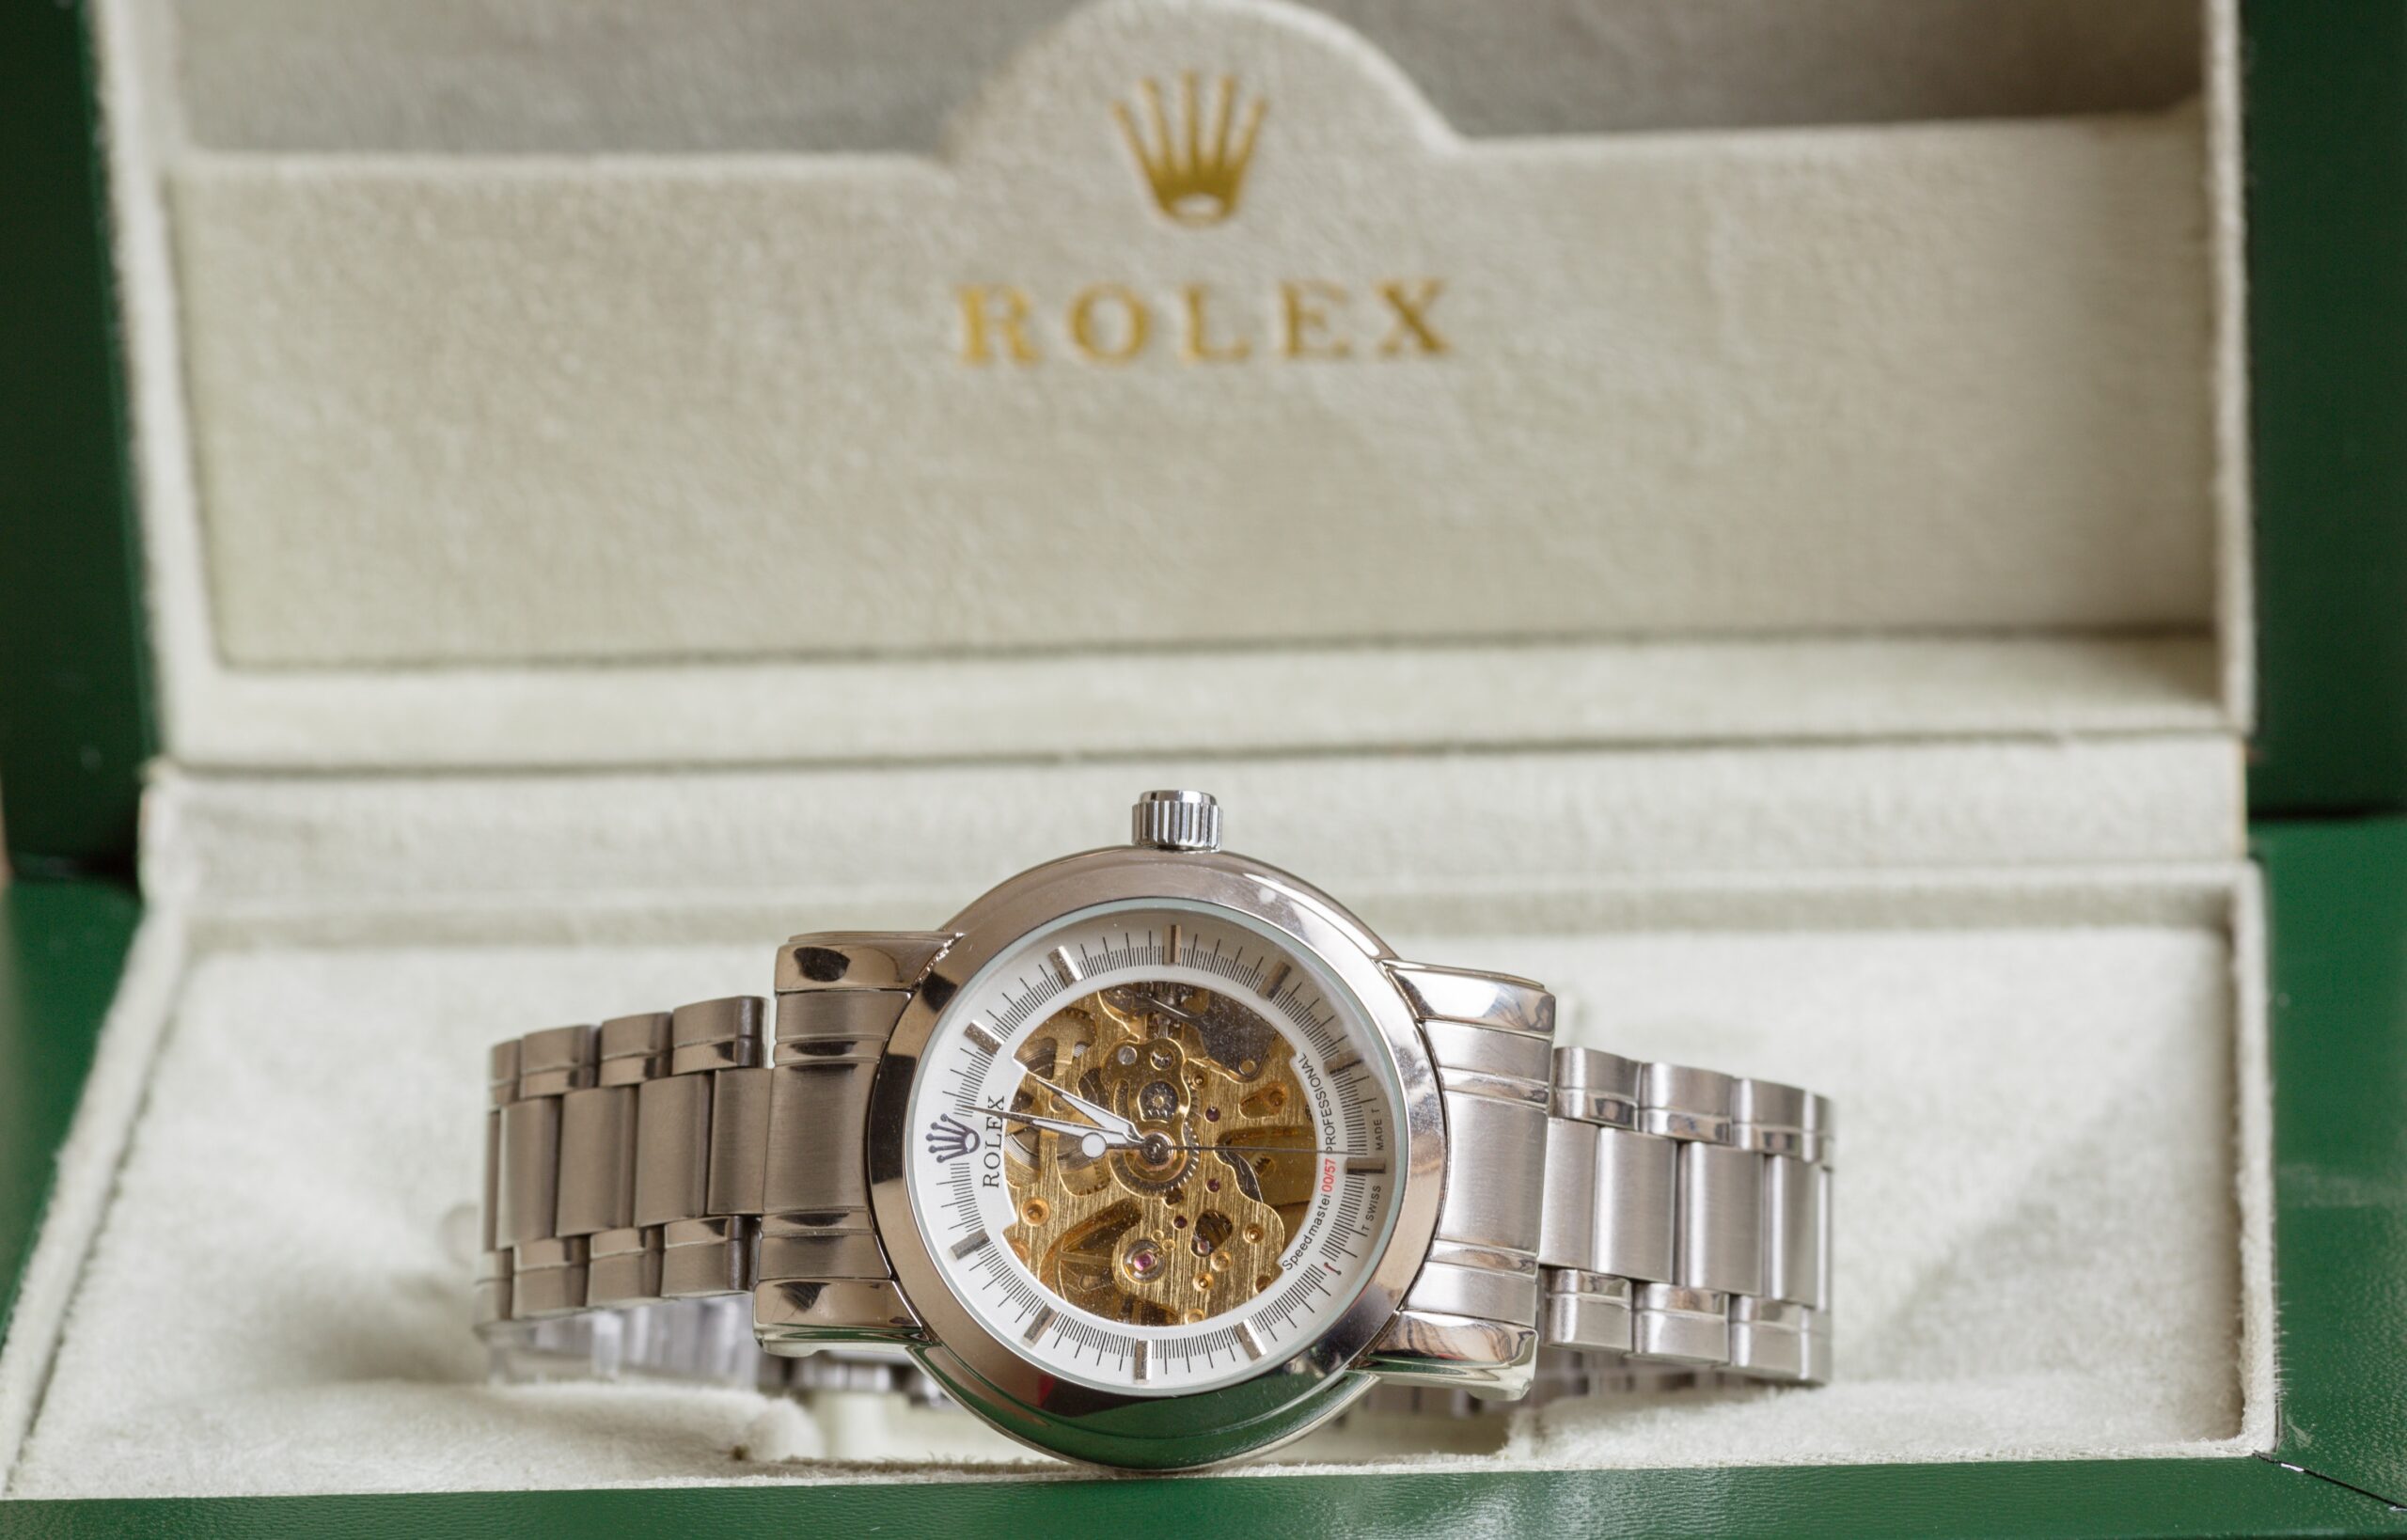 Women’s Rolex Watches: How to Determine the Right Wrist Band Size